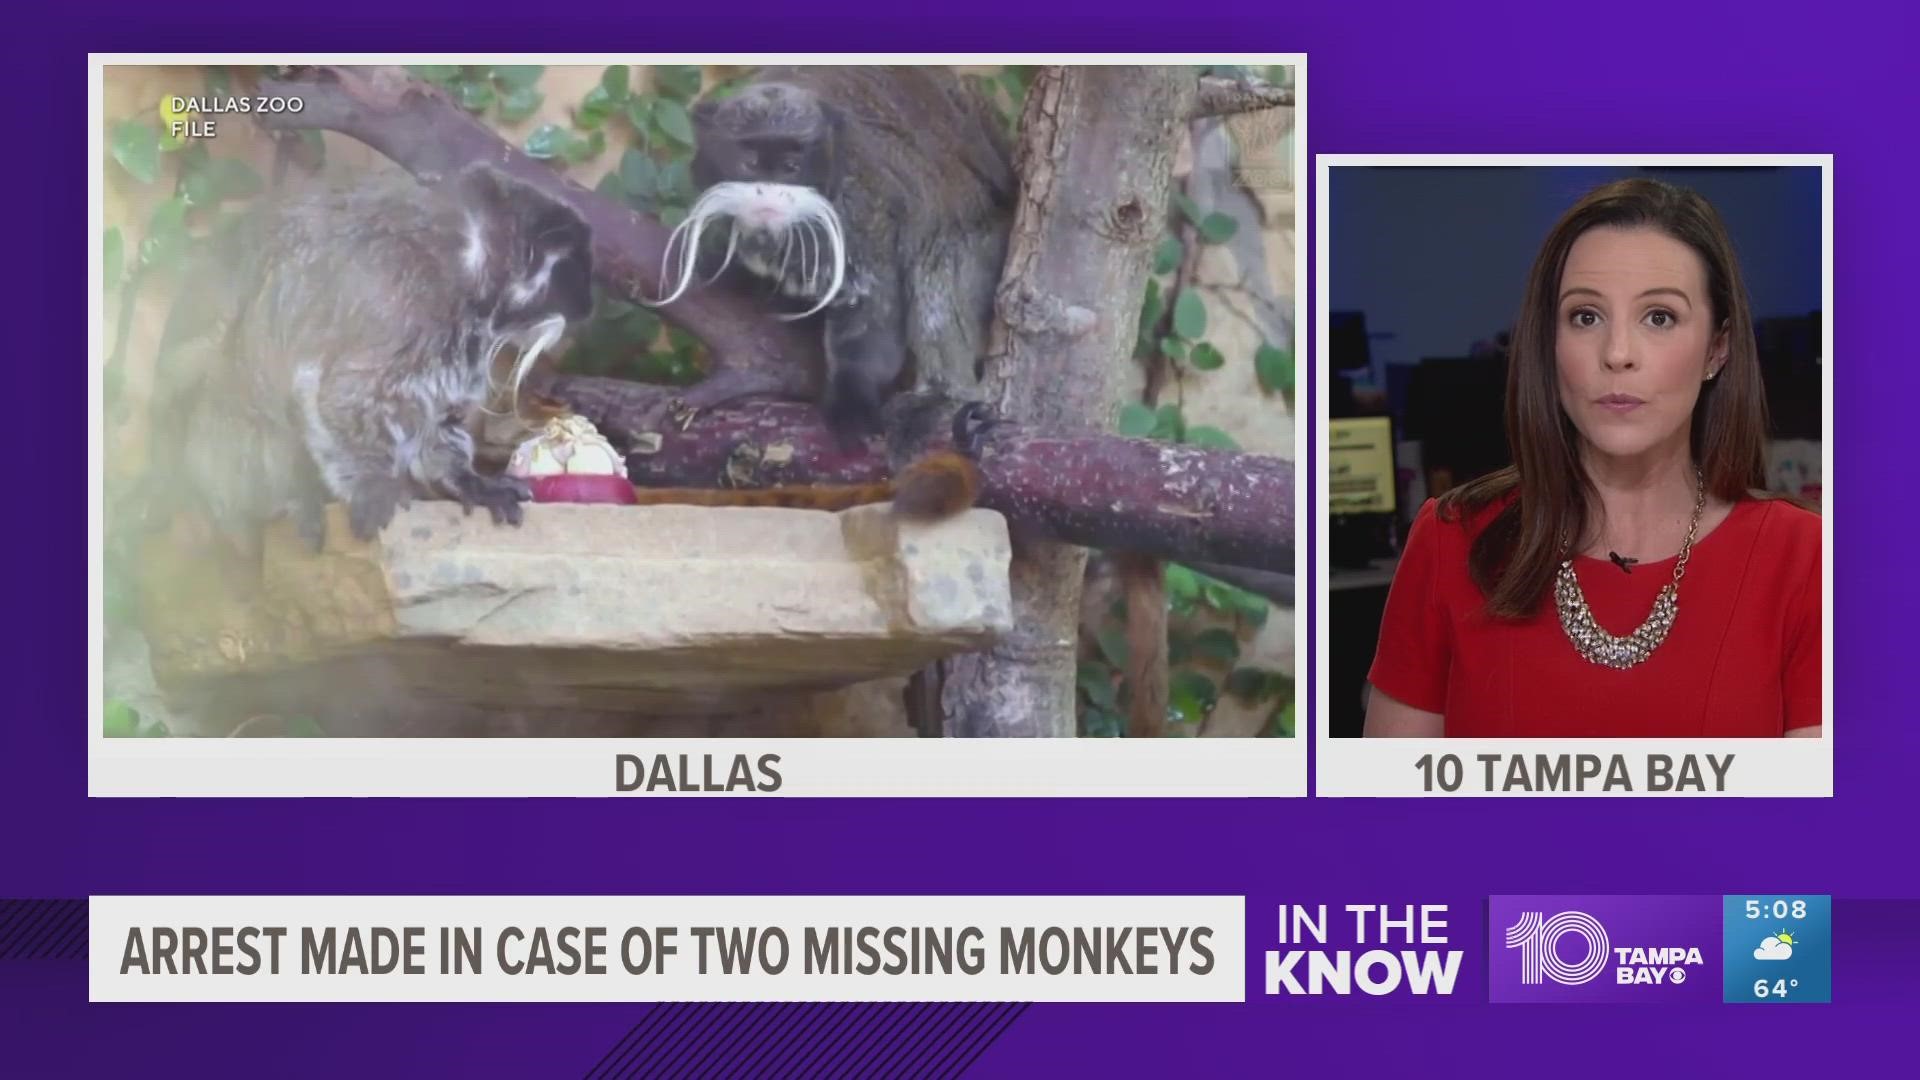 WFAA recently reported the monkeys were found in an empty church in Lancaster.